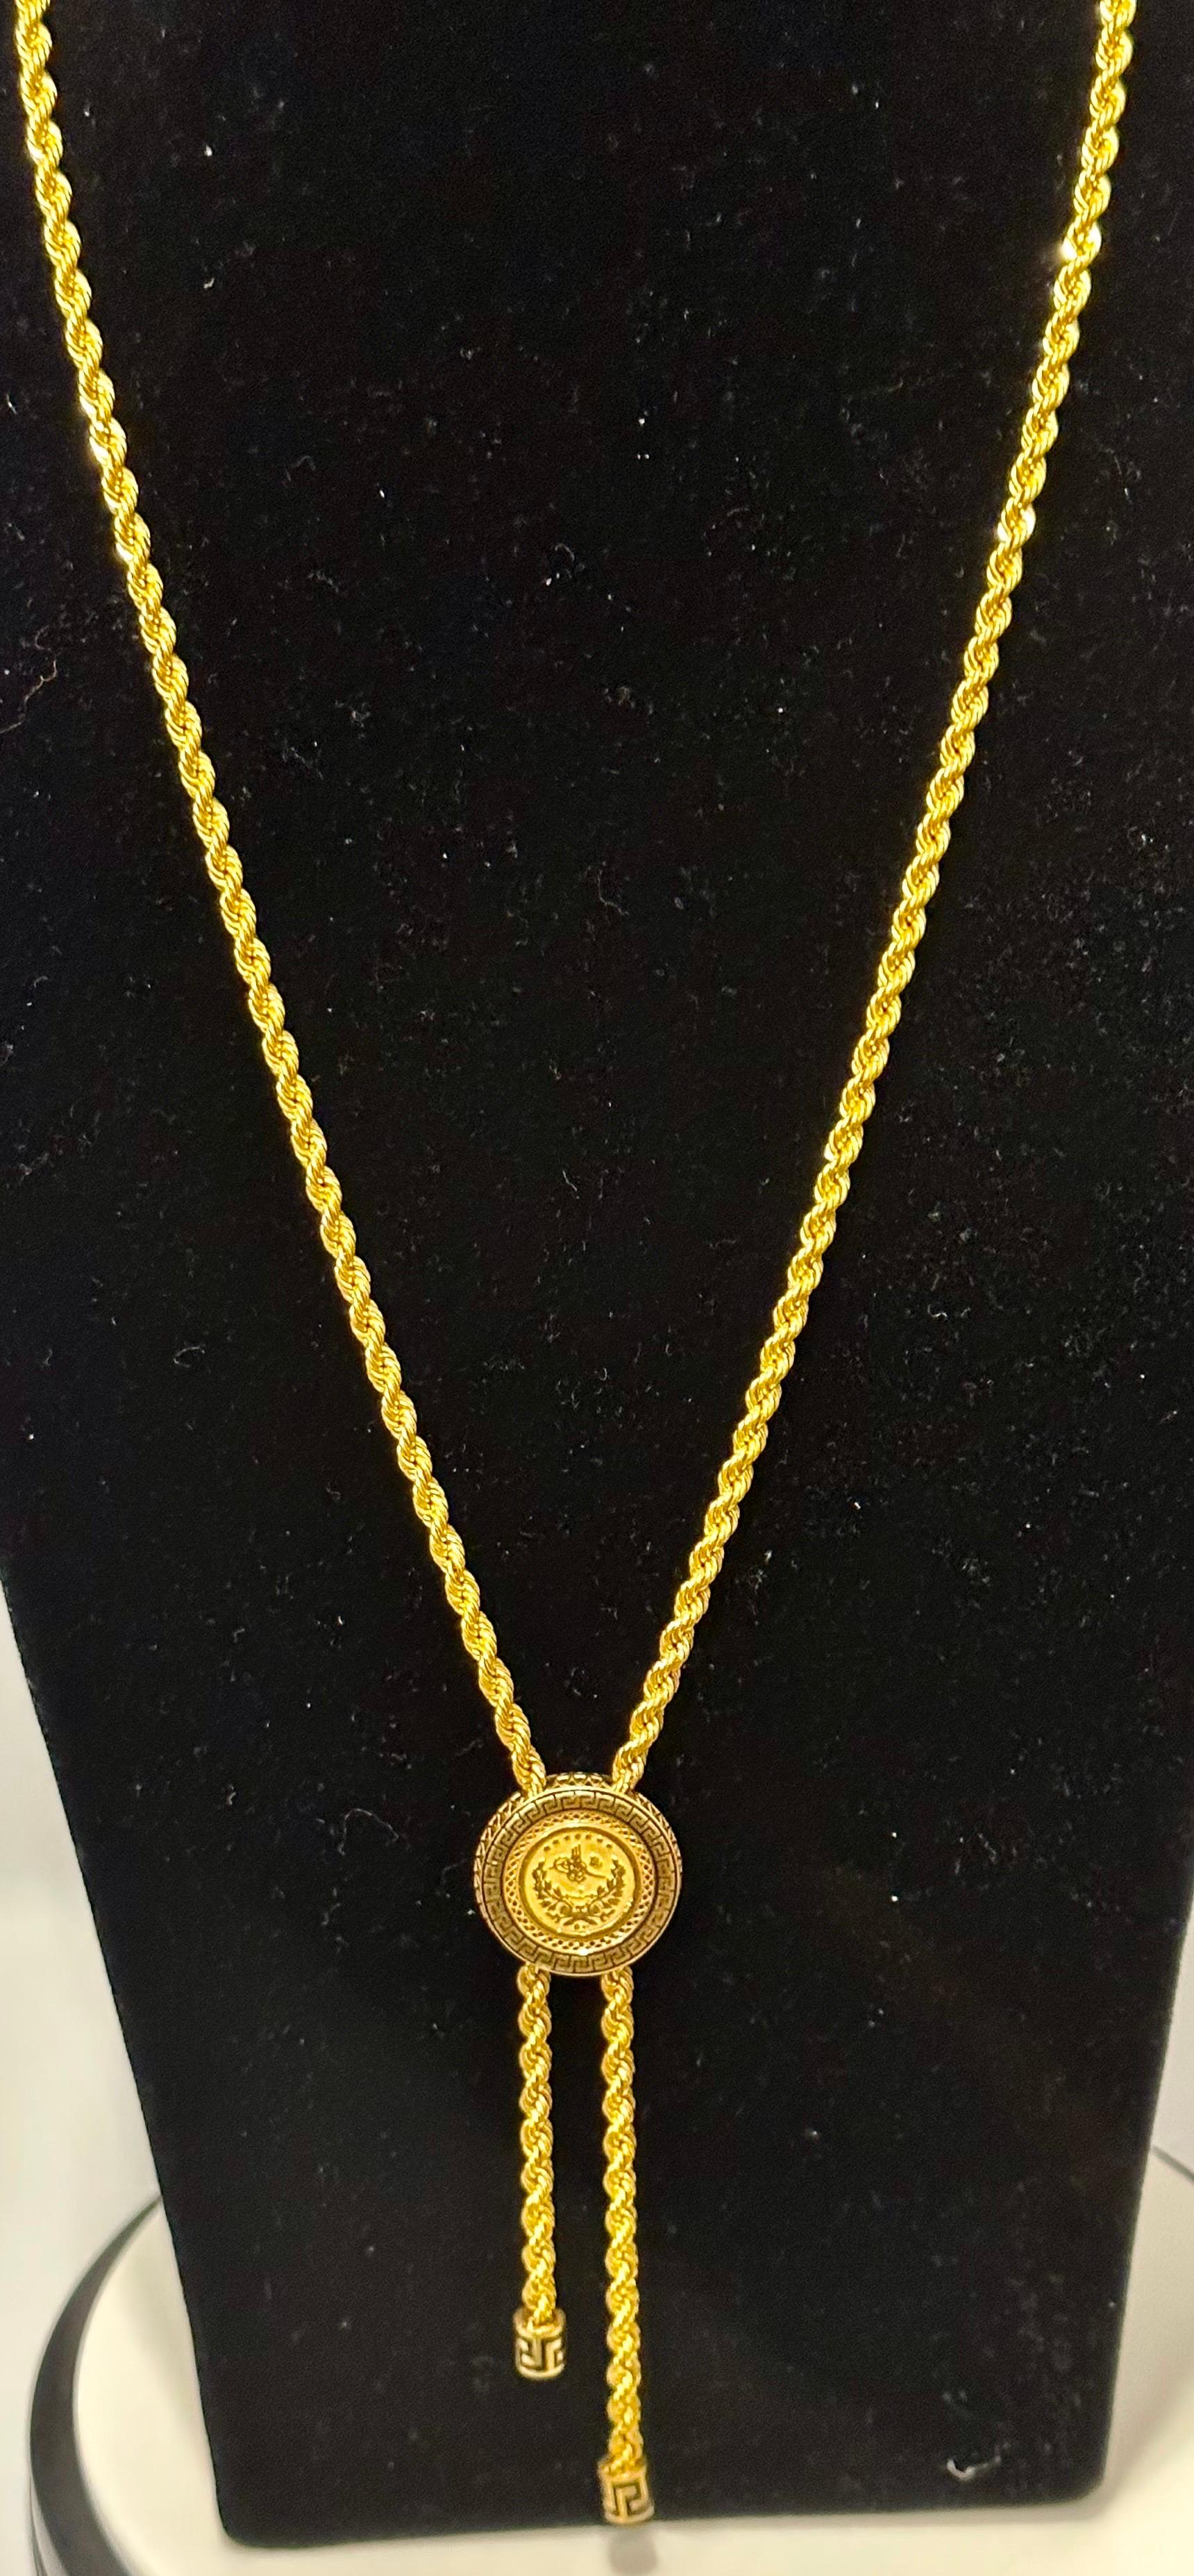 21 Karat Yellow Gold Coin Vintage Necklace with Hanging 4